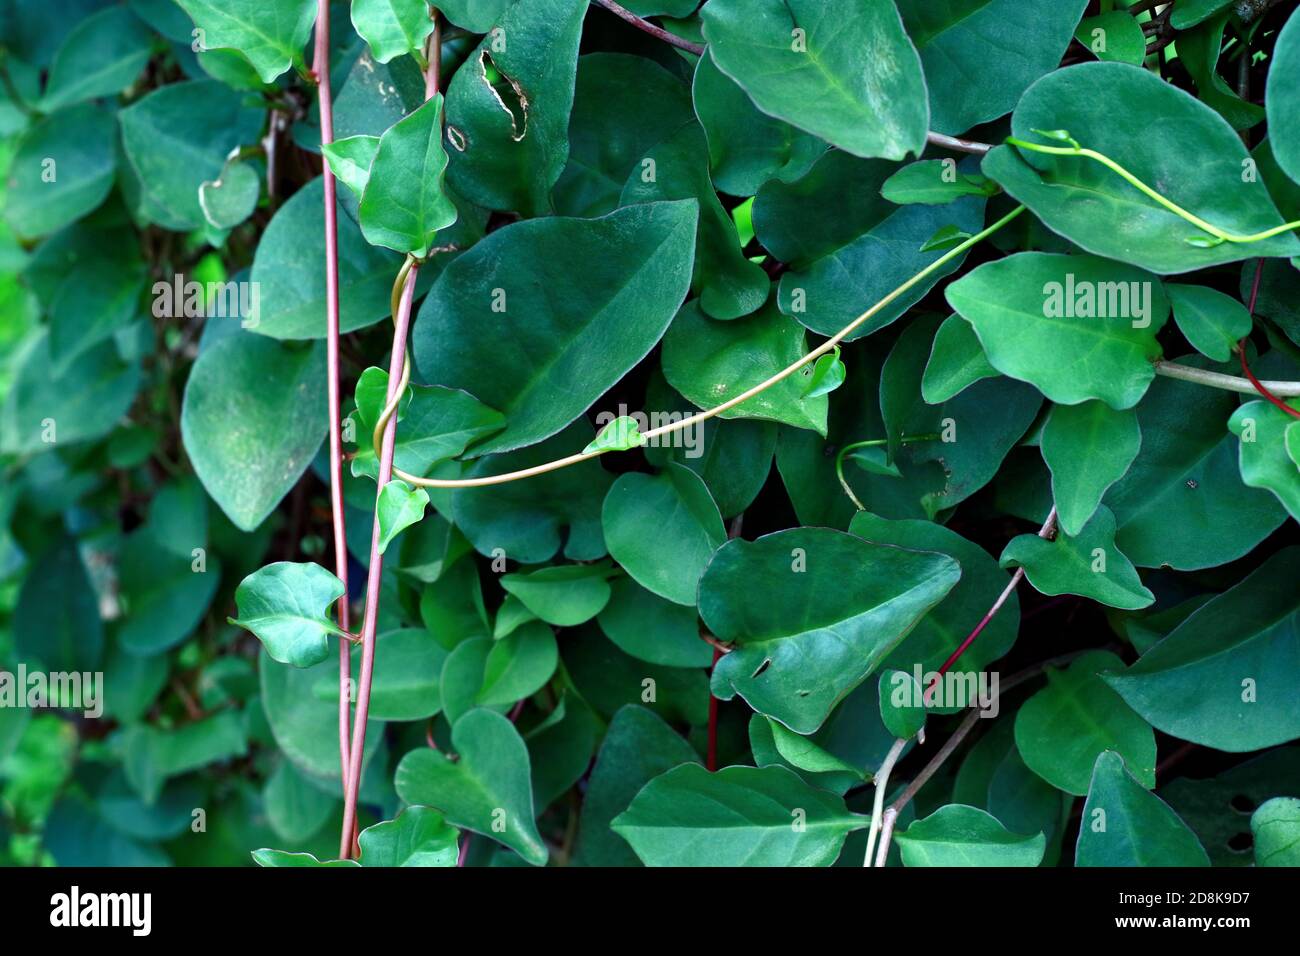 Anredera cordifolia or Madeira vine leaf. In Indonesian is binahong. Medicinal herb. Stock Photo